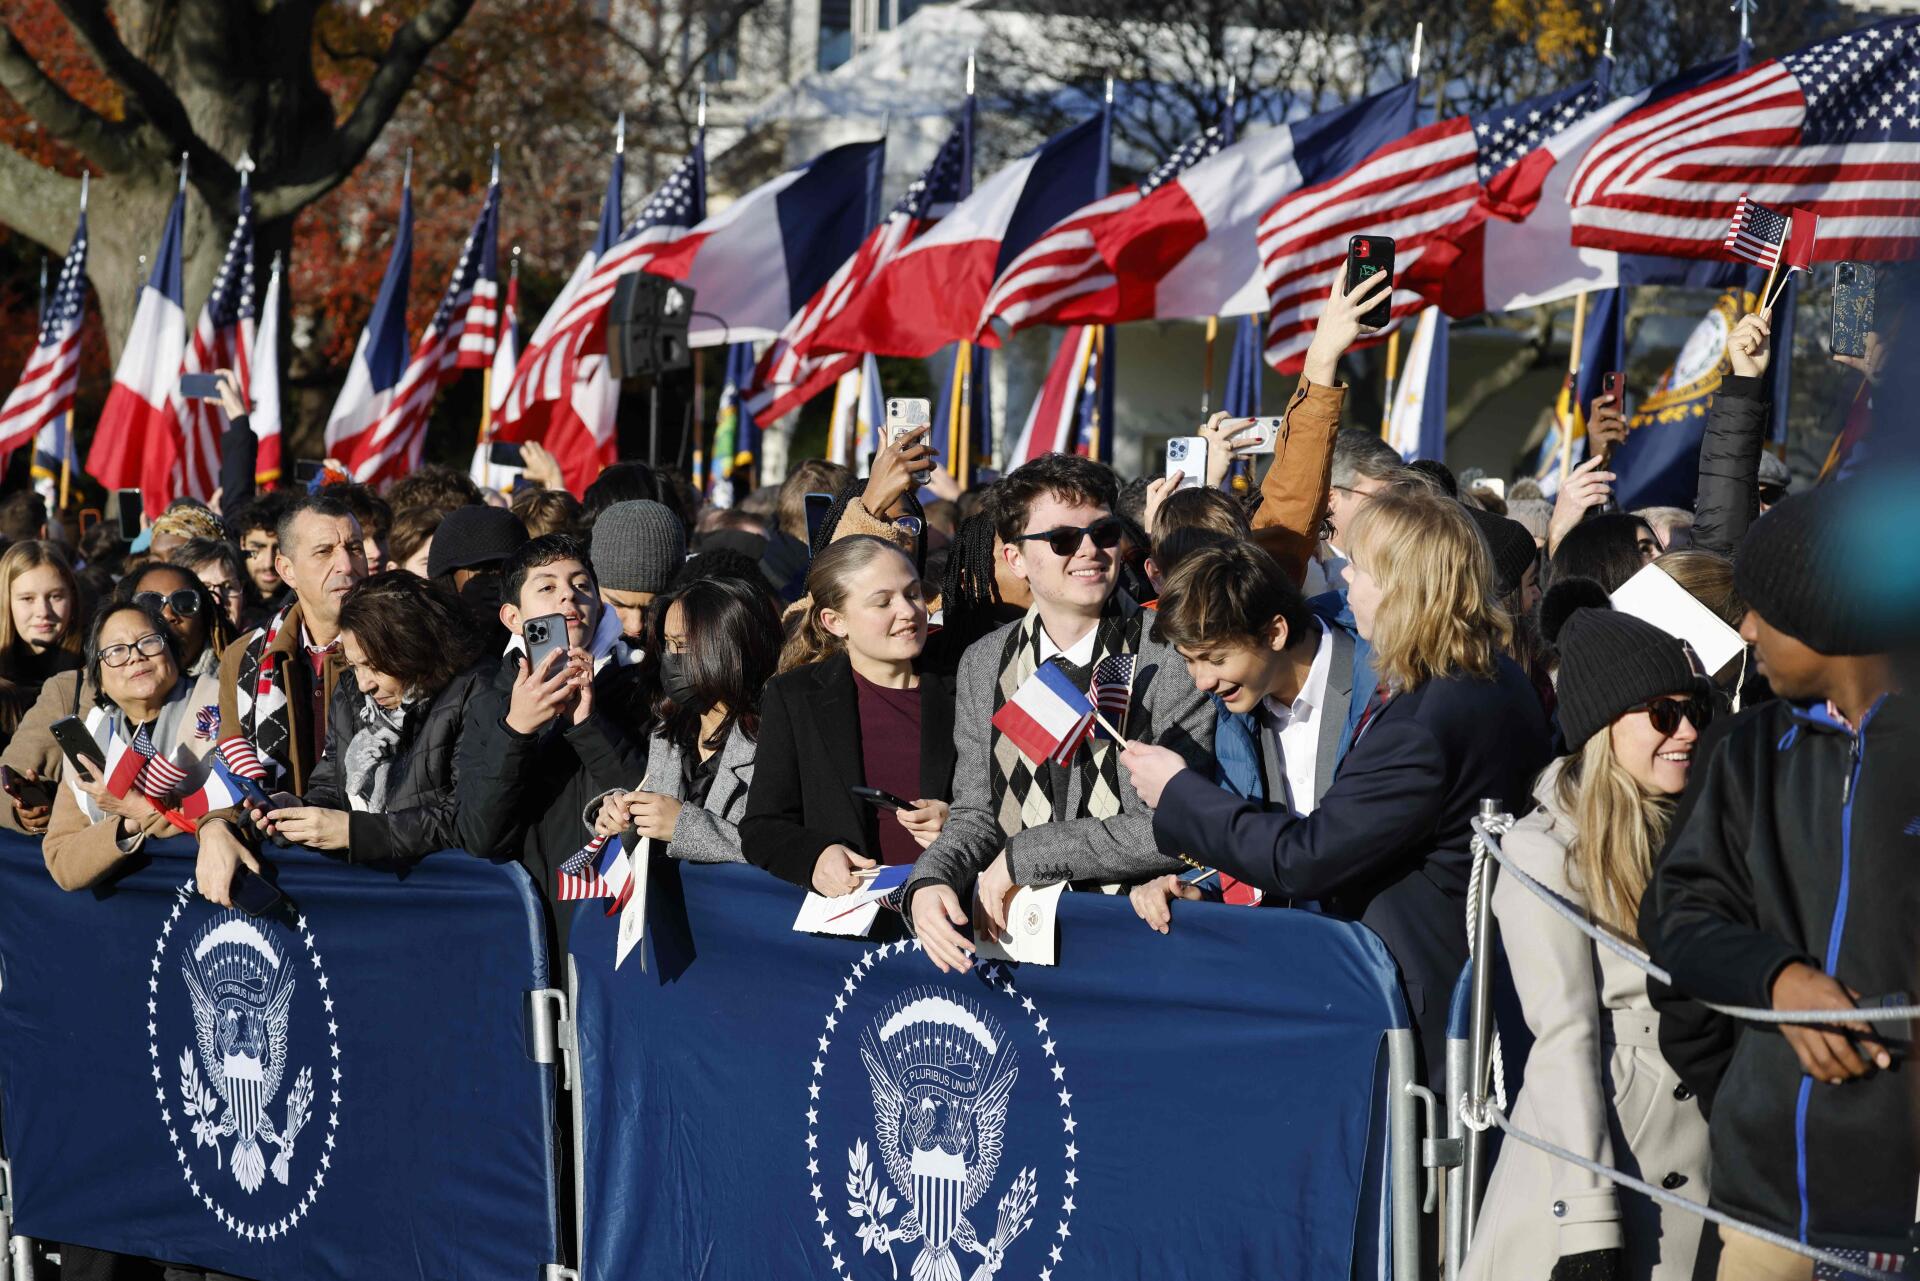 Visitors await the arrival of French President Emmanuel Macron and his wife Brigitte Macron to the White House in Washington, DC, on December 1.